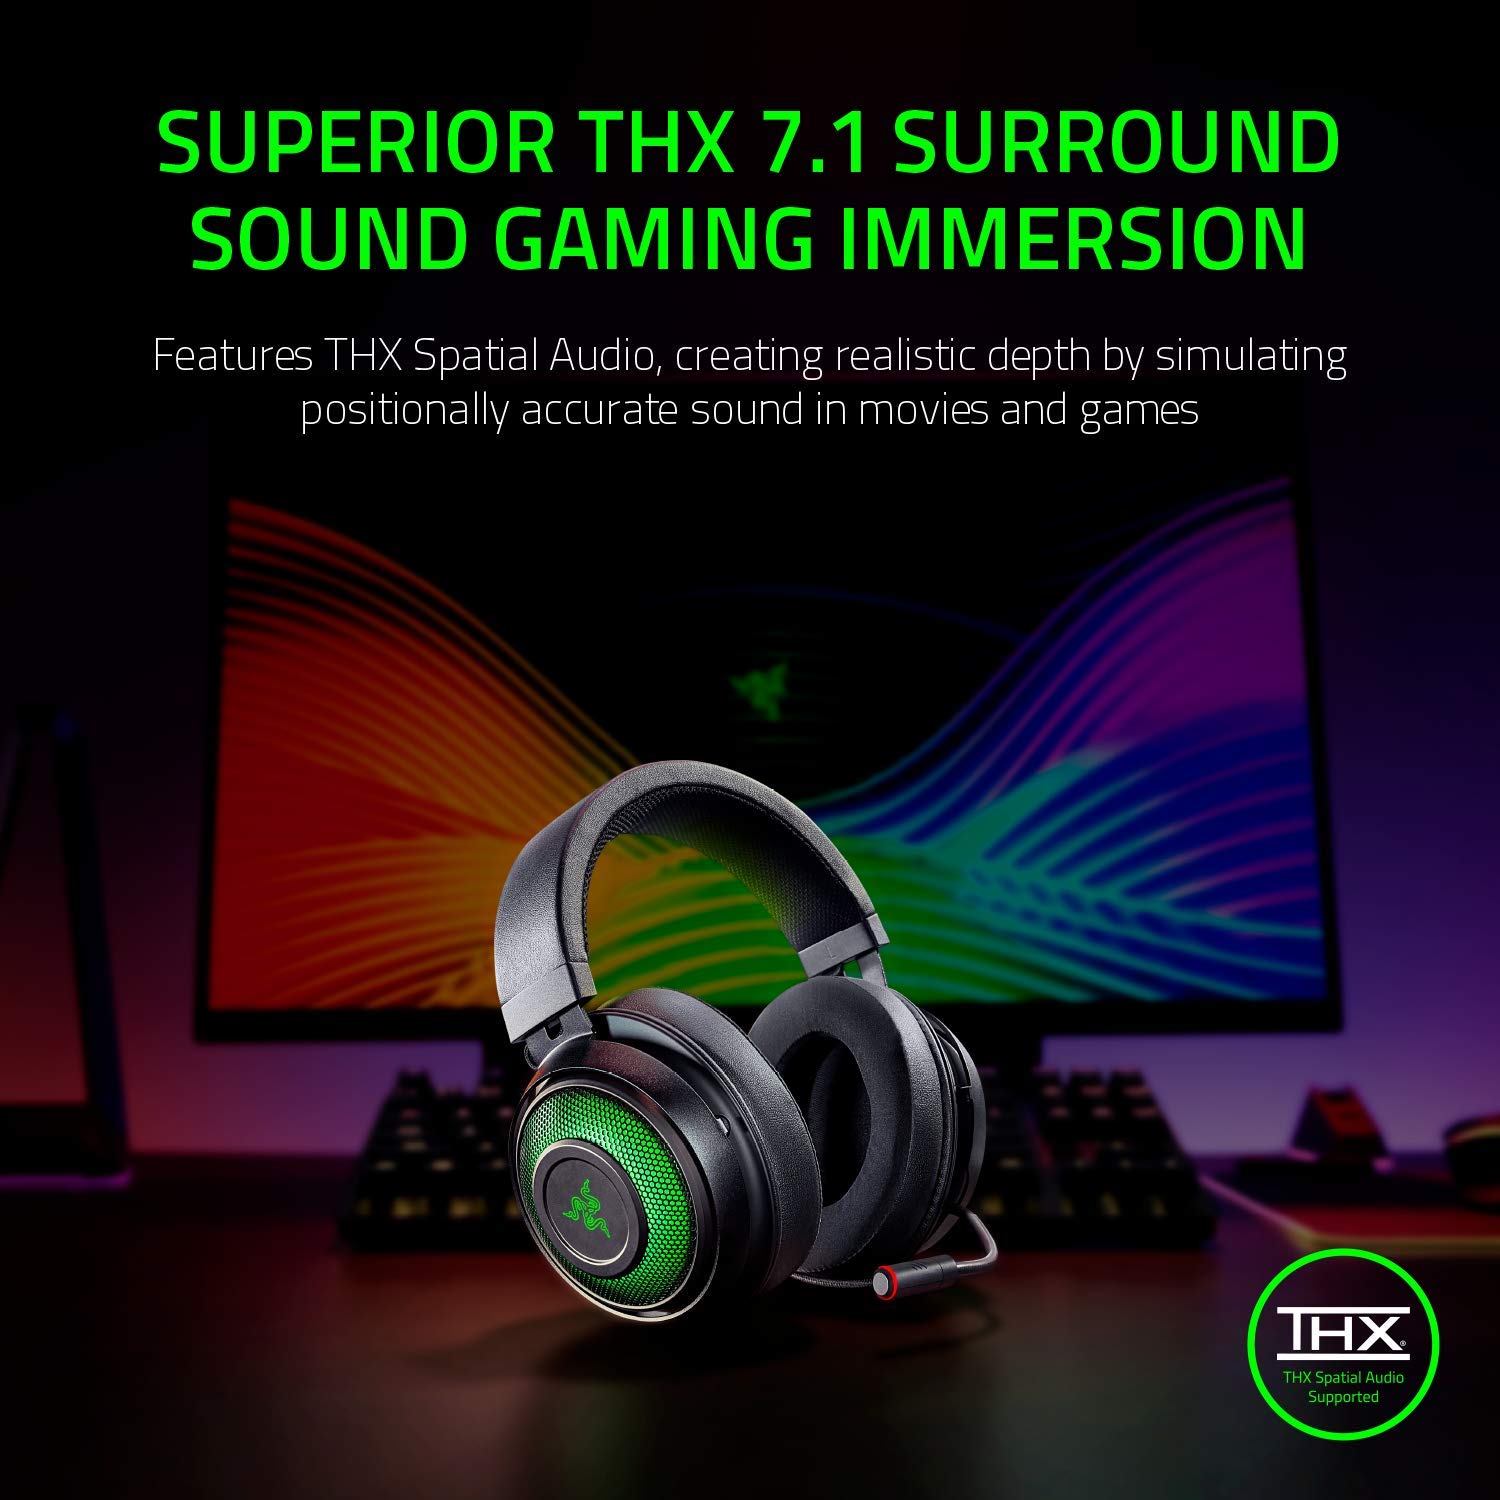 Razer Kraken Ultimate – USB Gaming Headset (Gaming Headphones for PC, PS4 and Switch Dock with Surround Sound, ANC Microphone and RGB Chroma)